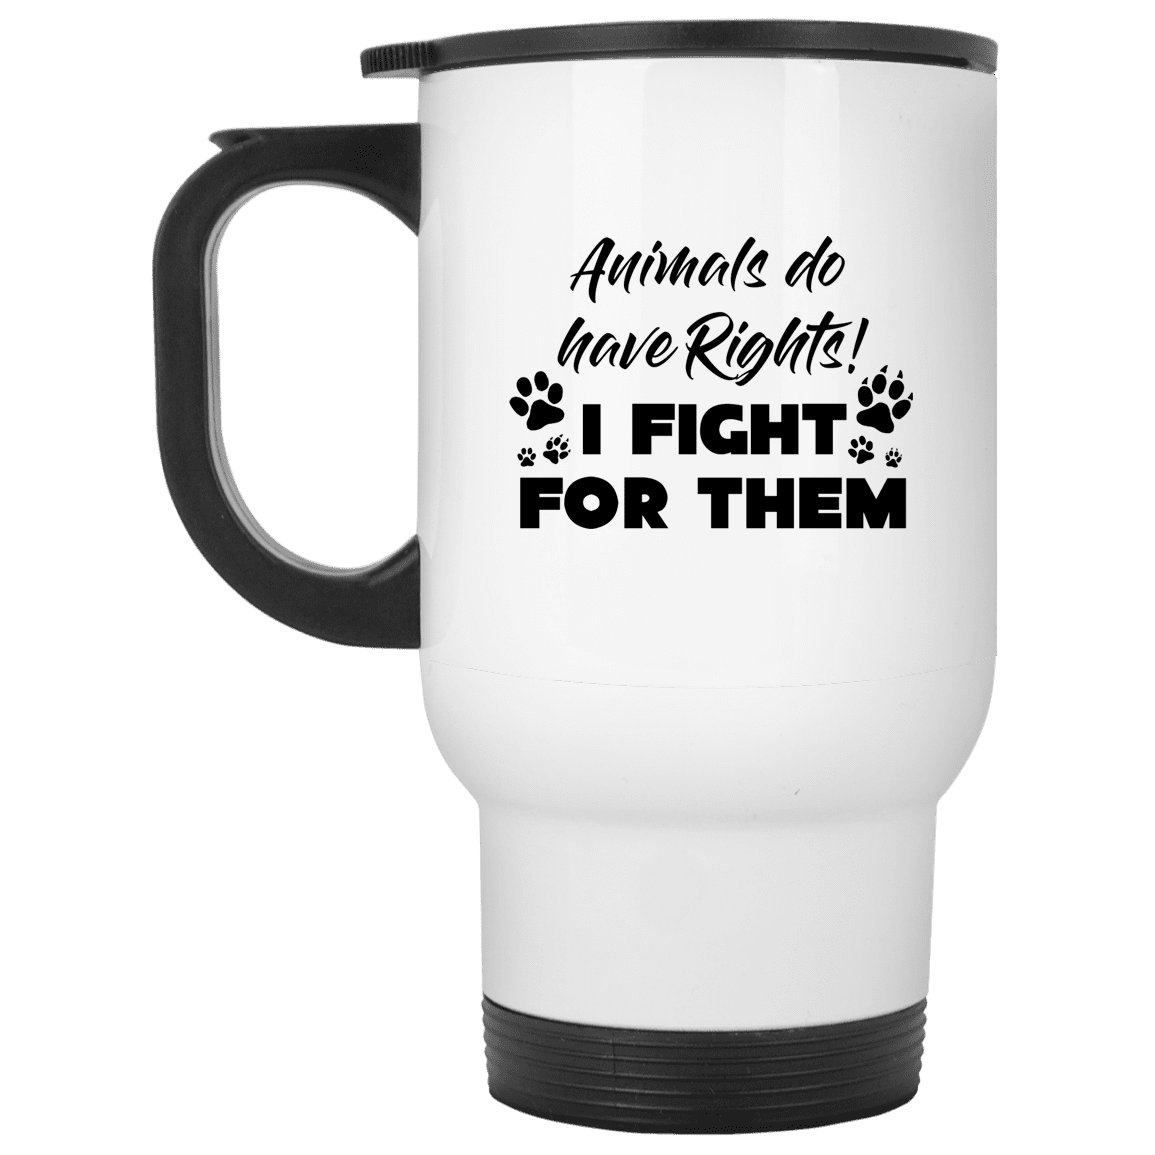 Animals Do have Rights - Mugs.